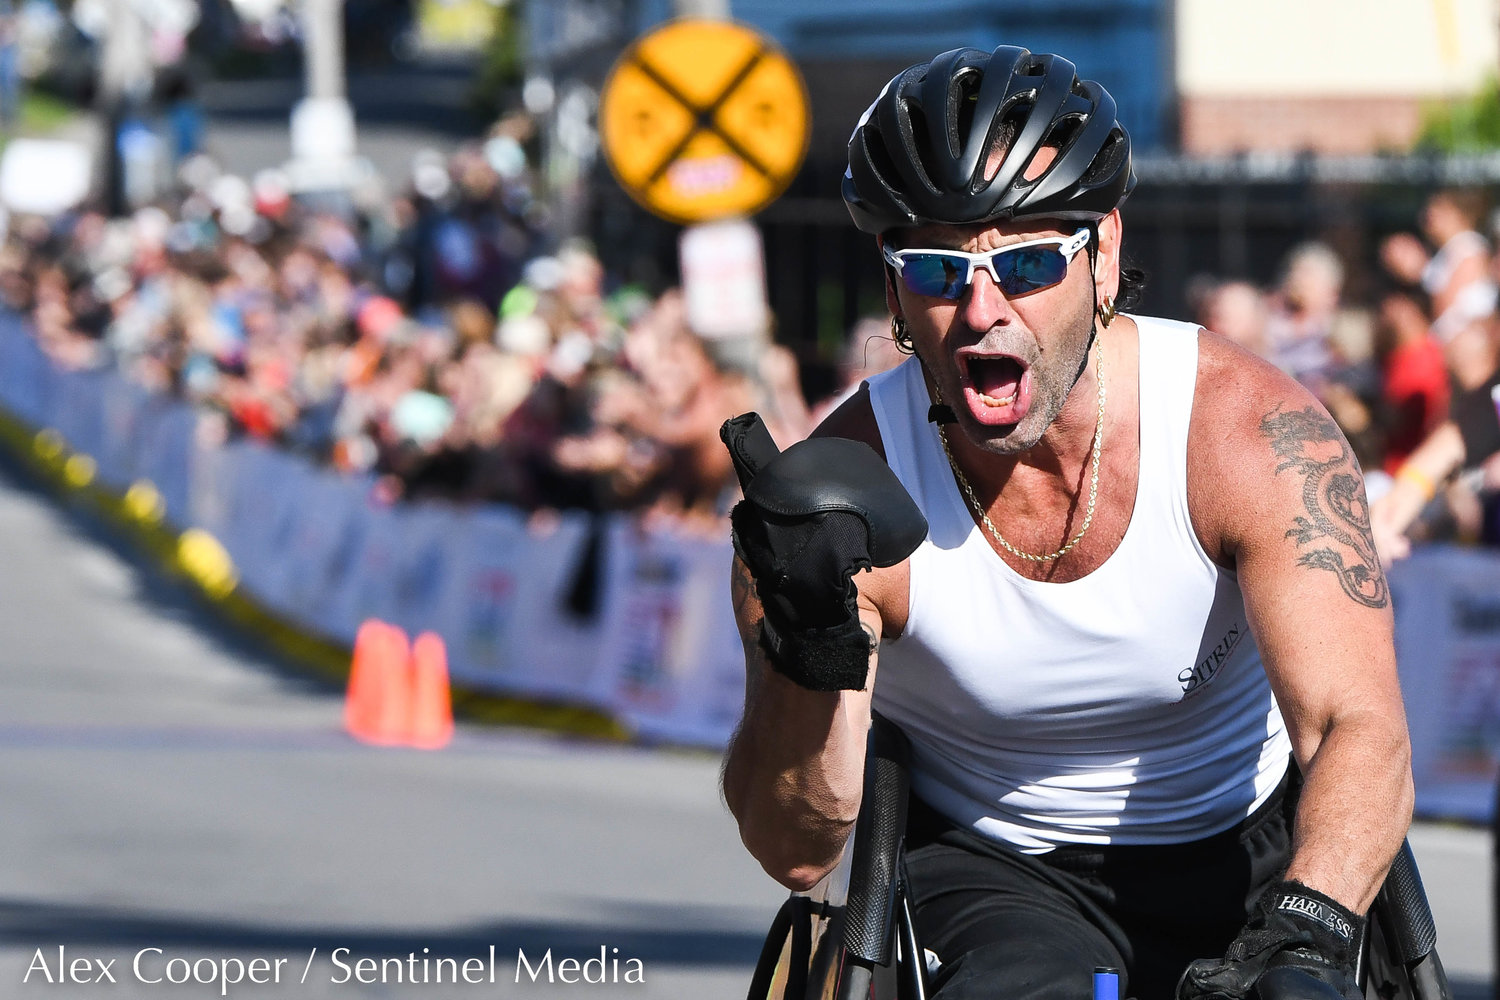 James Joseph crosses the finish line in the wheelchair 15K race during the 45th Boilermaker Road Race on Sunday, July 10 in Utica.